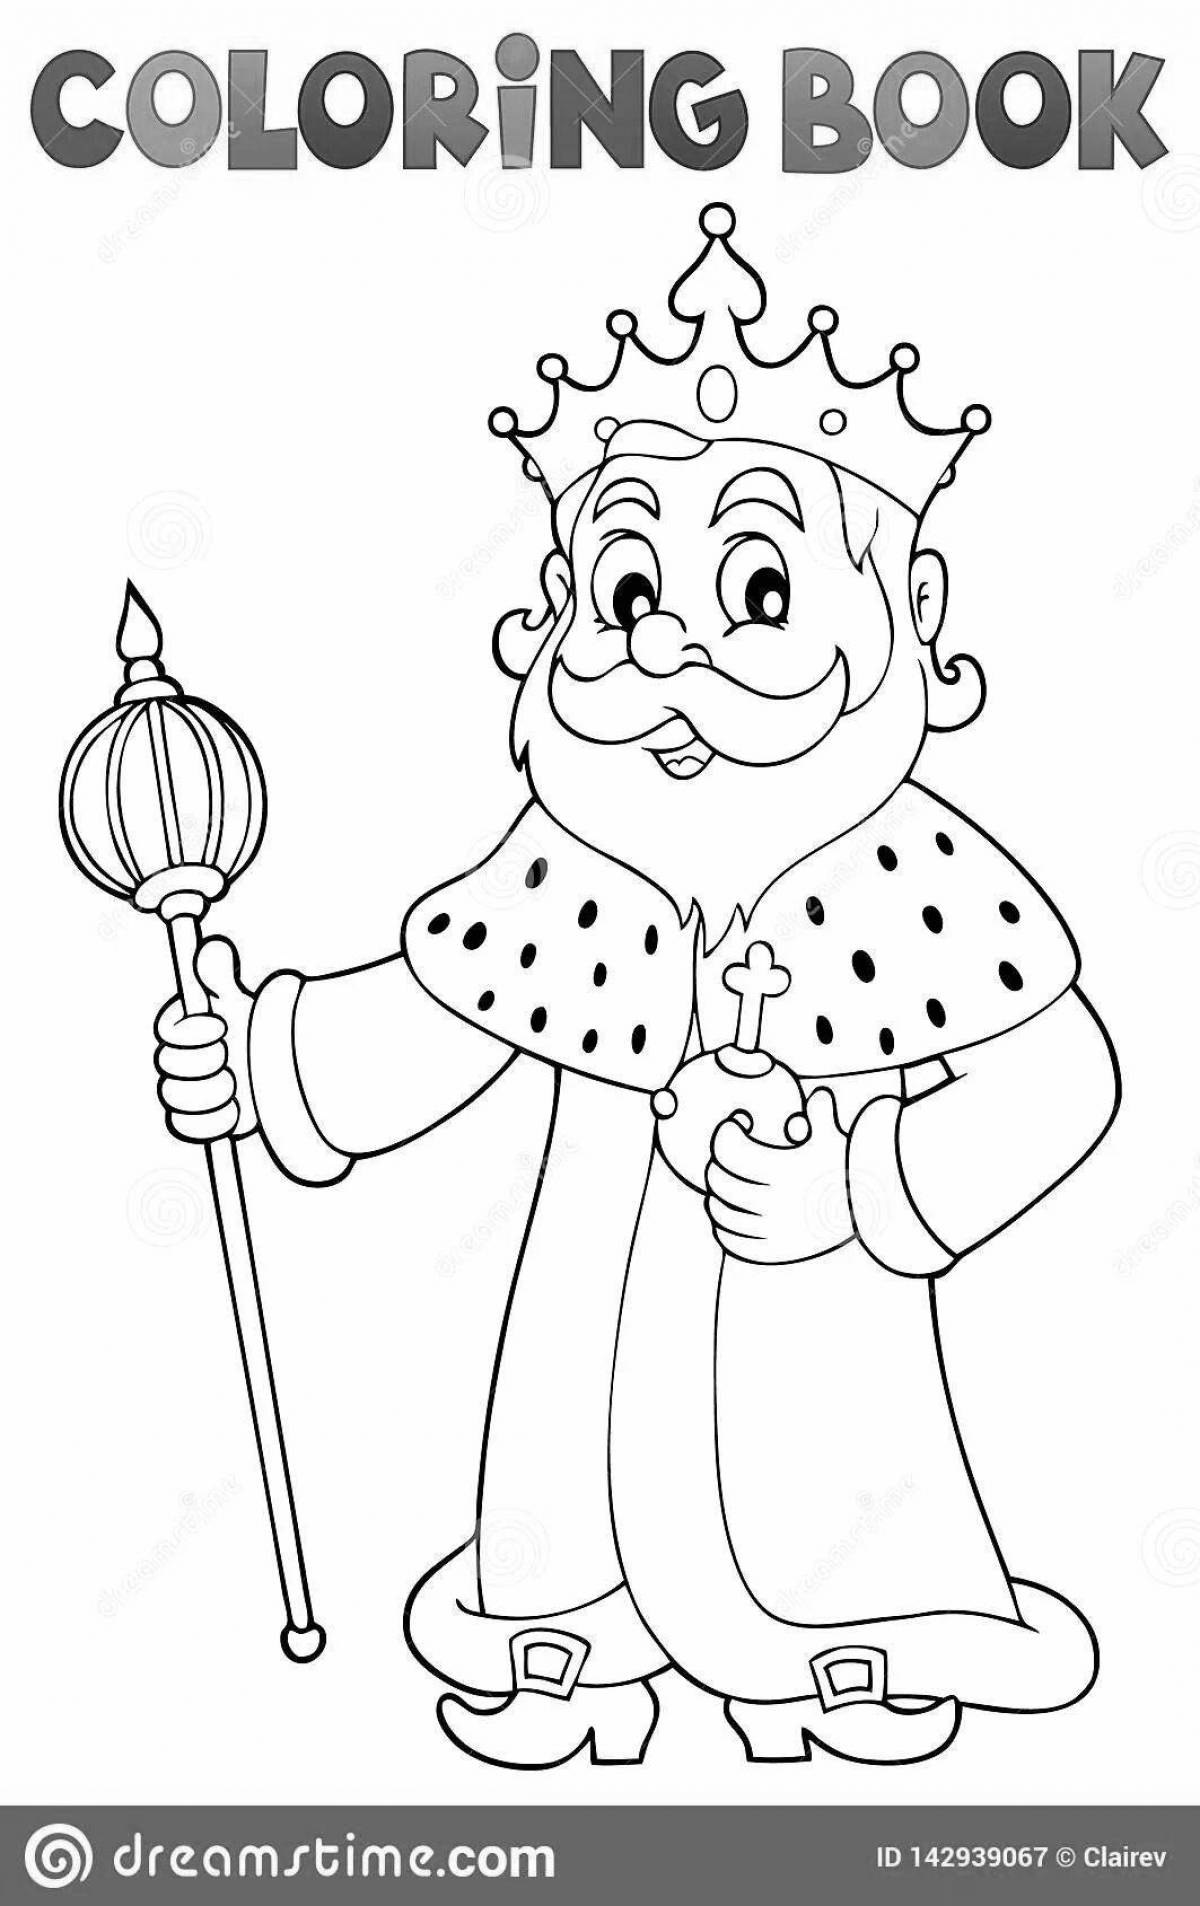 Colorful king coloring pages for kids